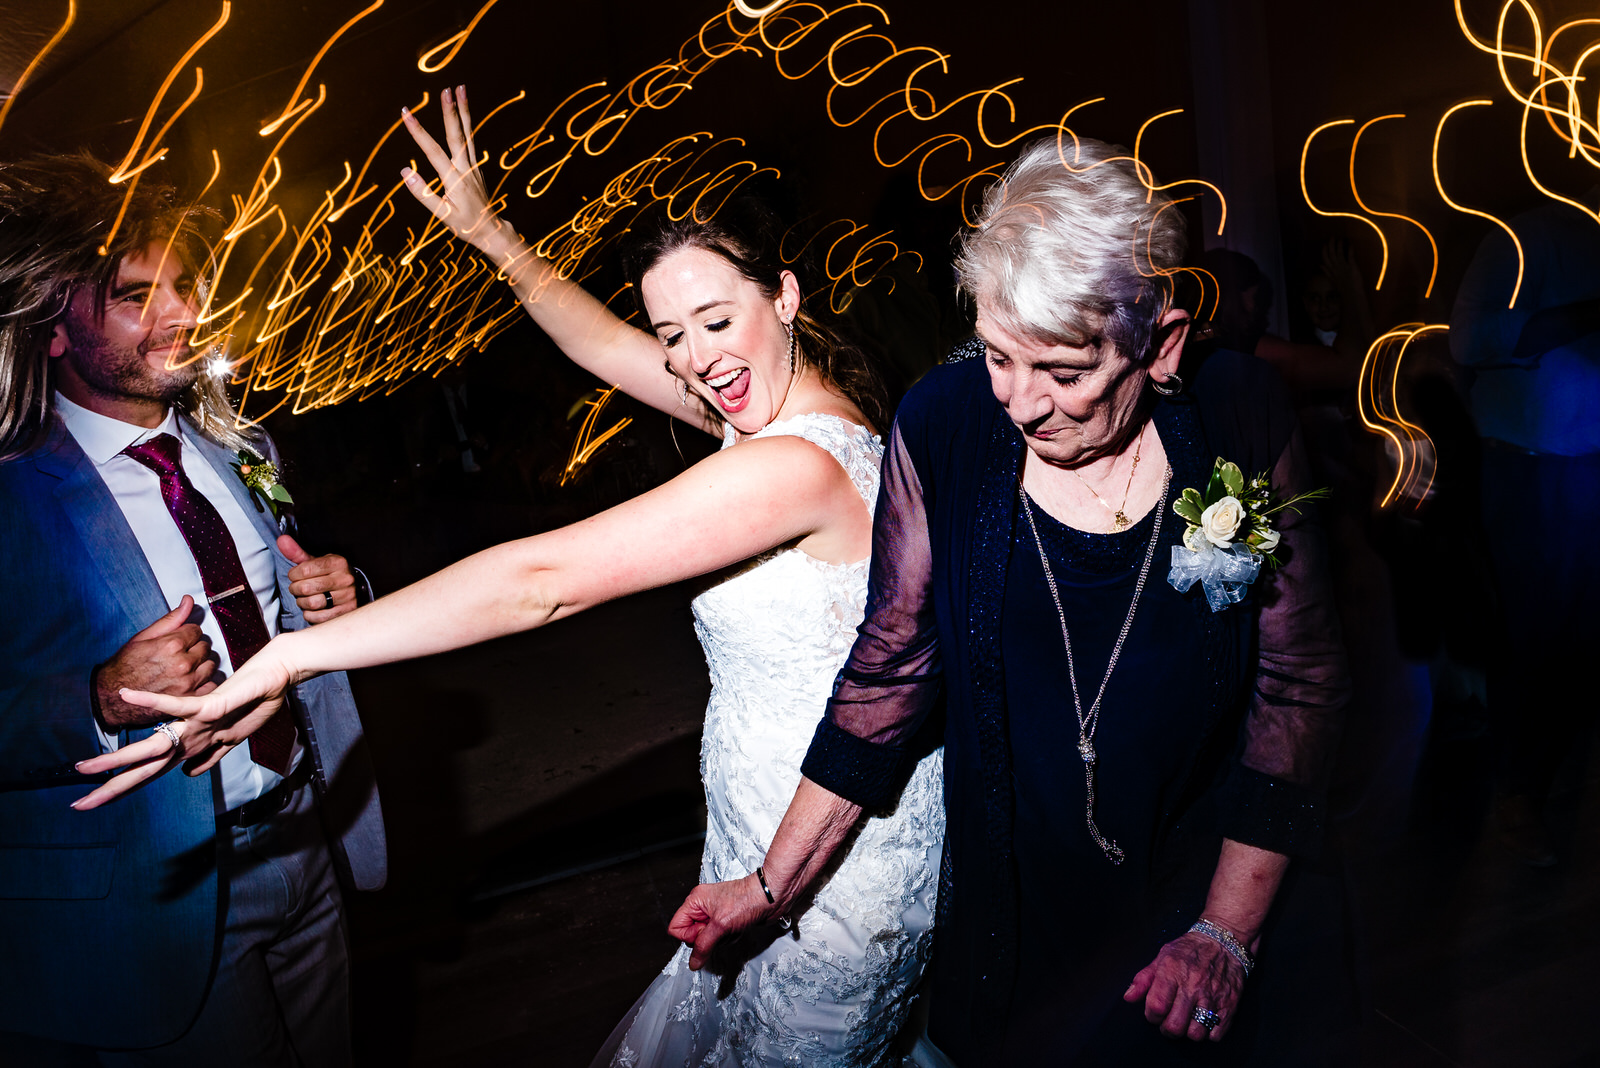 Bride dances with the groom's grandmother at her wedding reception by Raleigh wedding photographers